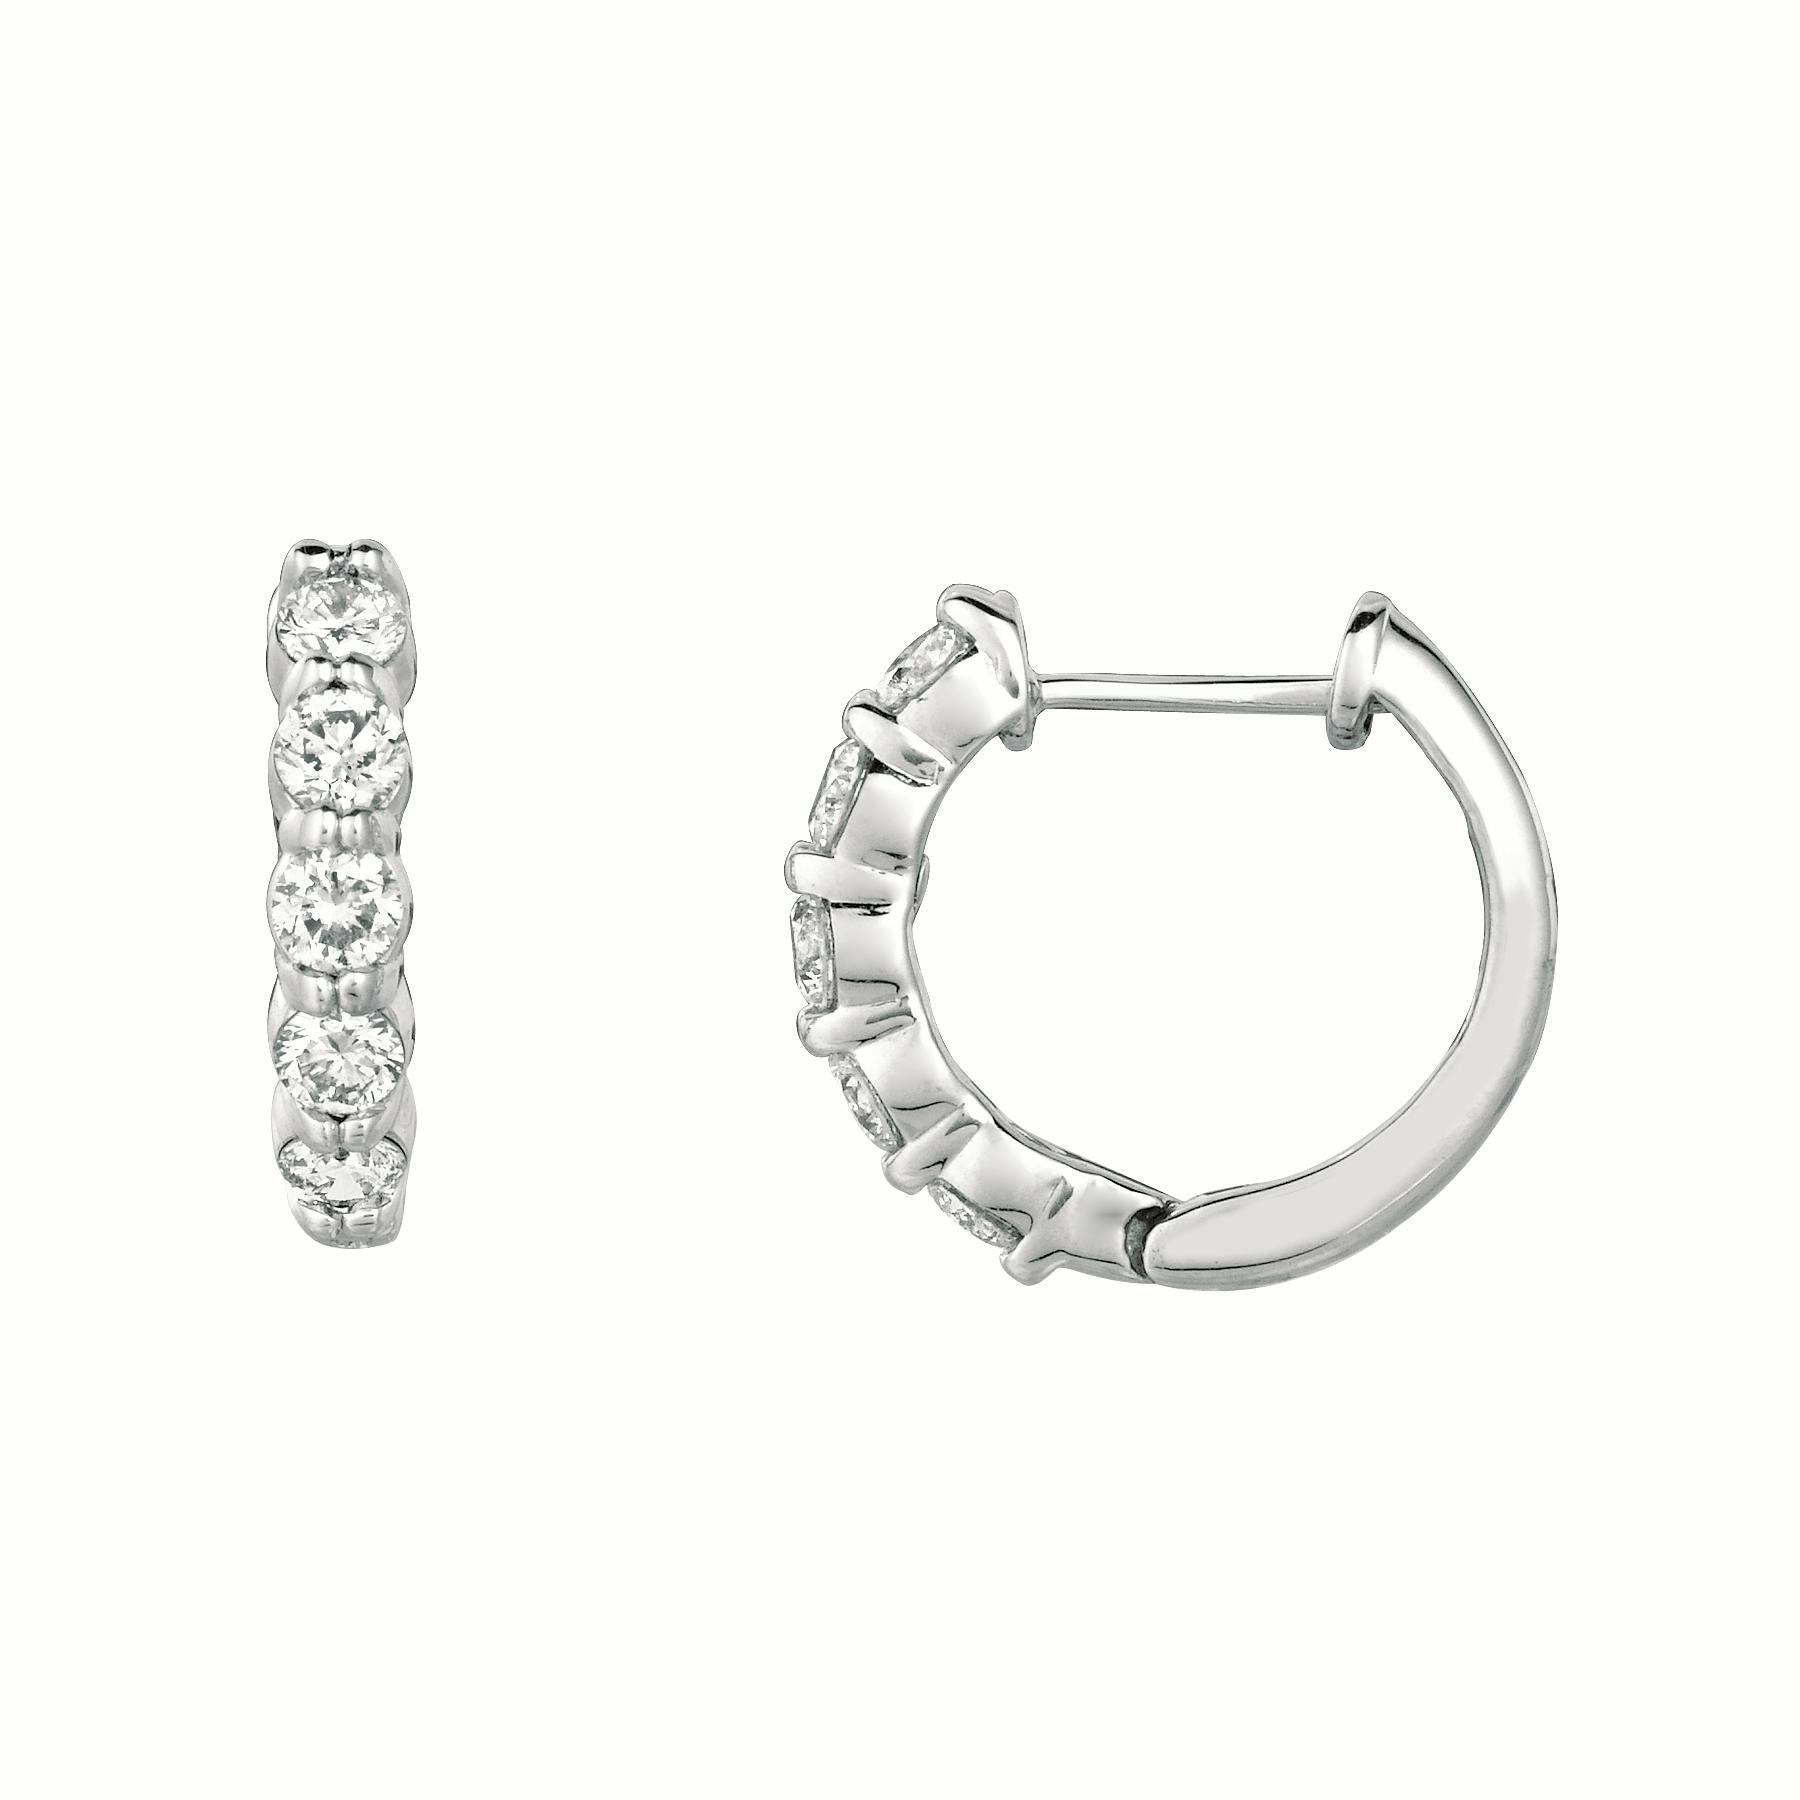 1.00 Carat Natural Diamond Hoop Earrings G SI 14K White Gold

    100% Natural, Not Enhanced in any way Round Cut Diamond Earrings
    1.00CT
    G-H 
    SI  
    14K White Gold,  3.7grams, Prong
    5/8 inch in height, 1/8 inch in width
    10